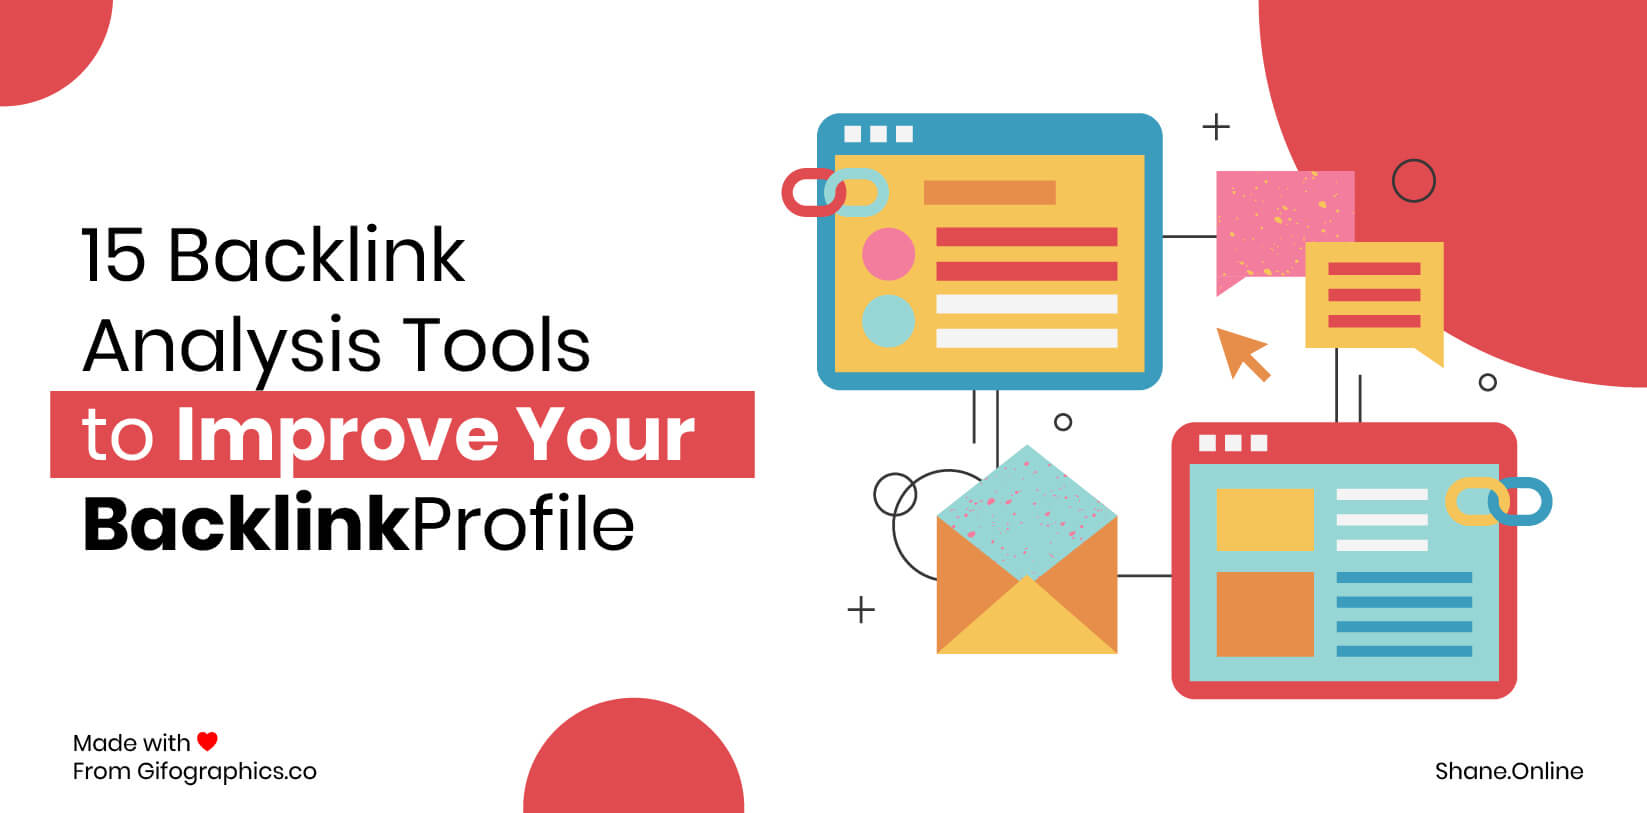 15 Backlink Analysis Tools to Improve Your Backlink Profile